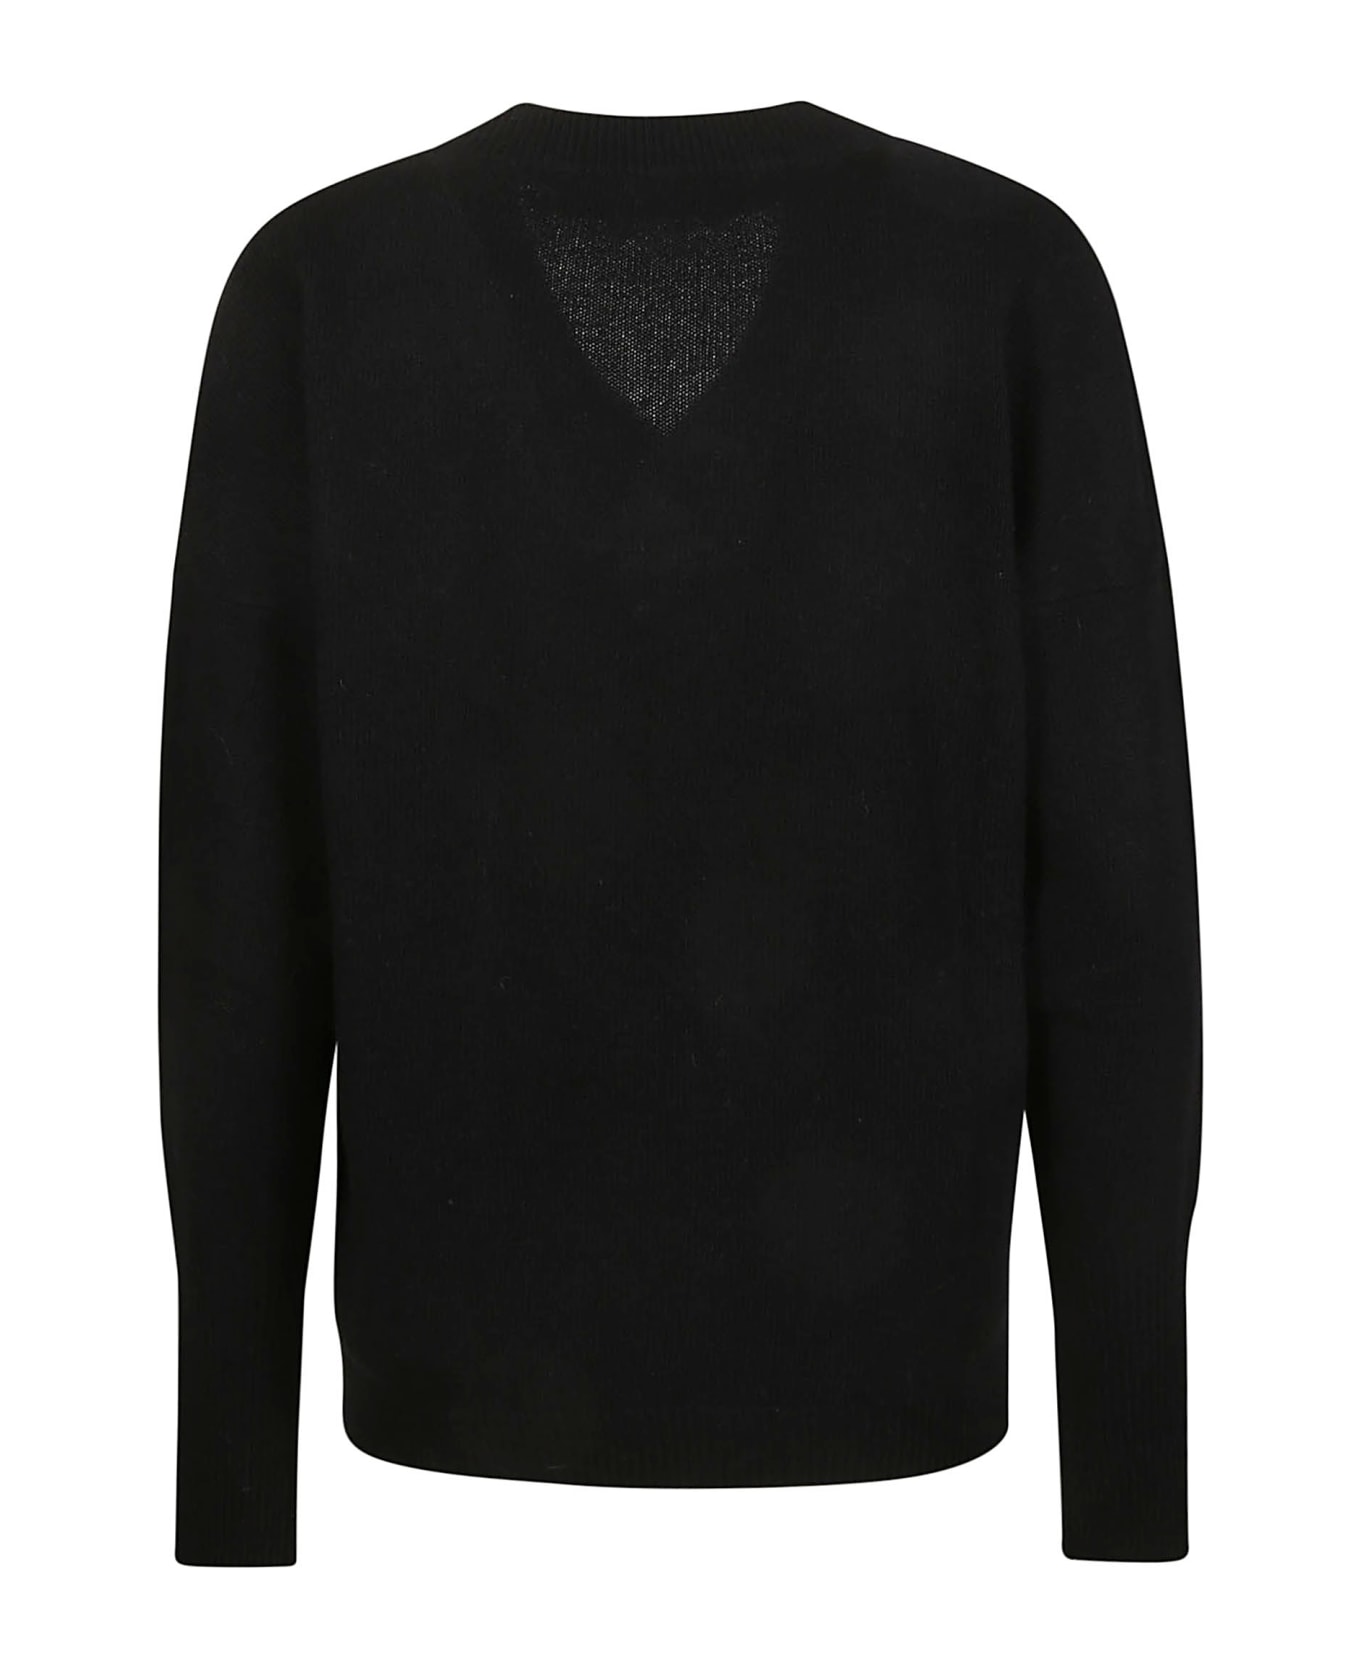 Federica Tosi Cut Out Sweater - Nero ニットウェア